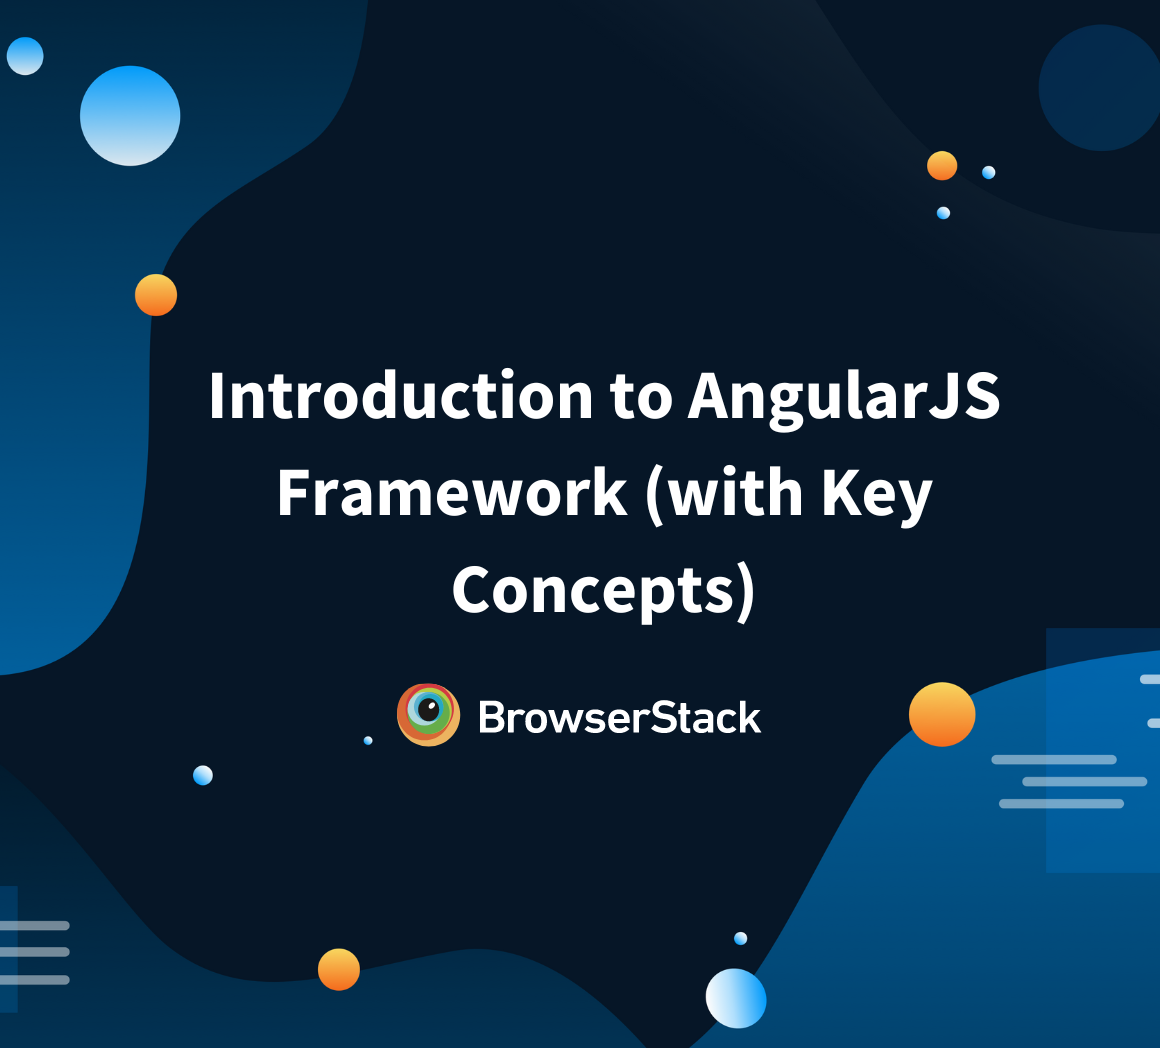 Introduction to AngularJS Framework (with Key Concepts)